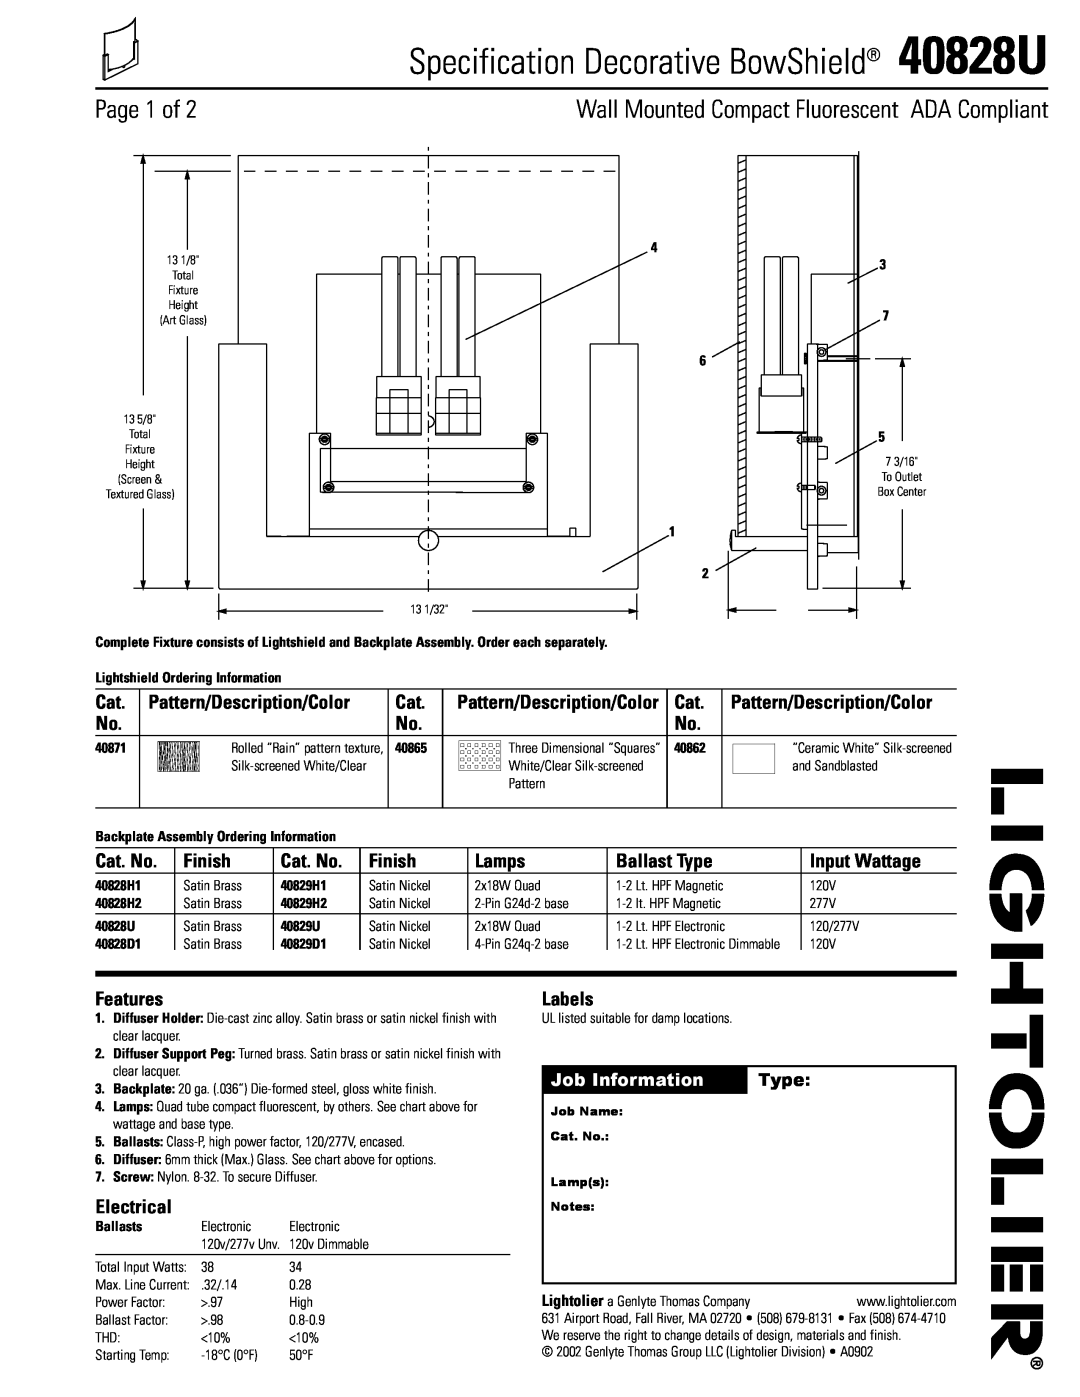 Lightolier manual Page 1 of, Specification Decorative BowShield 40828U 